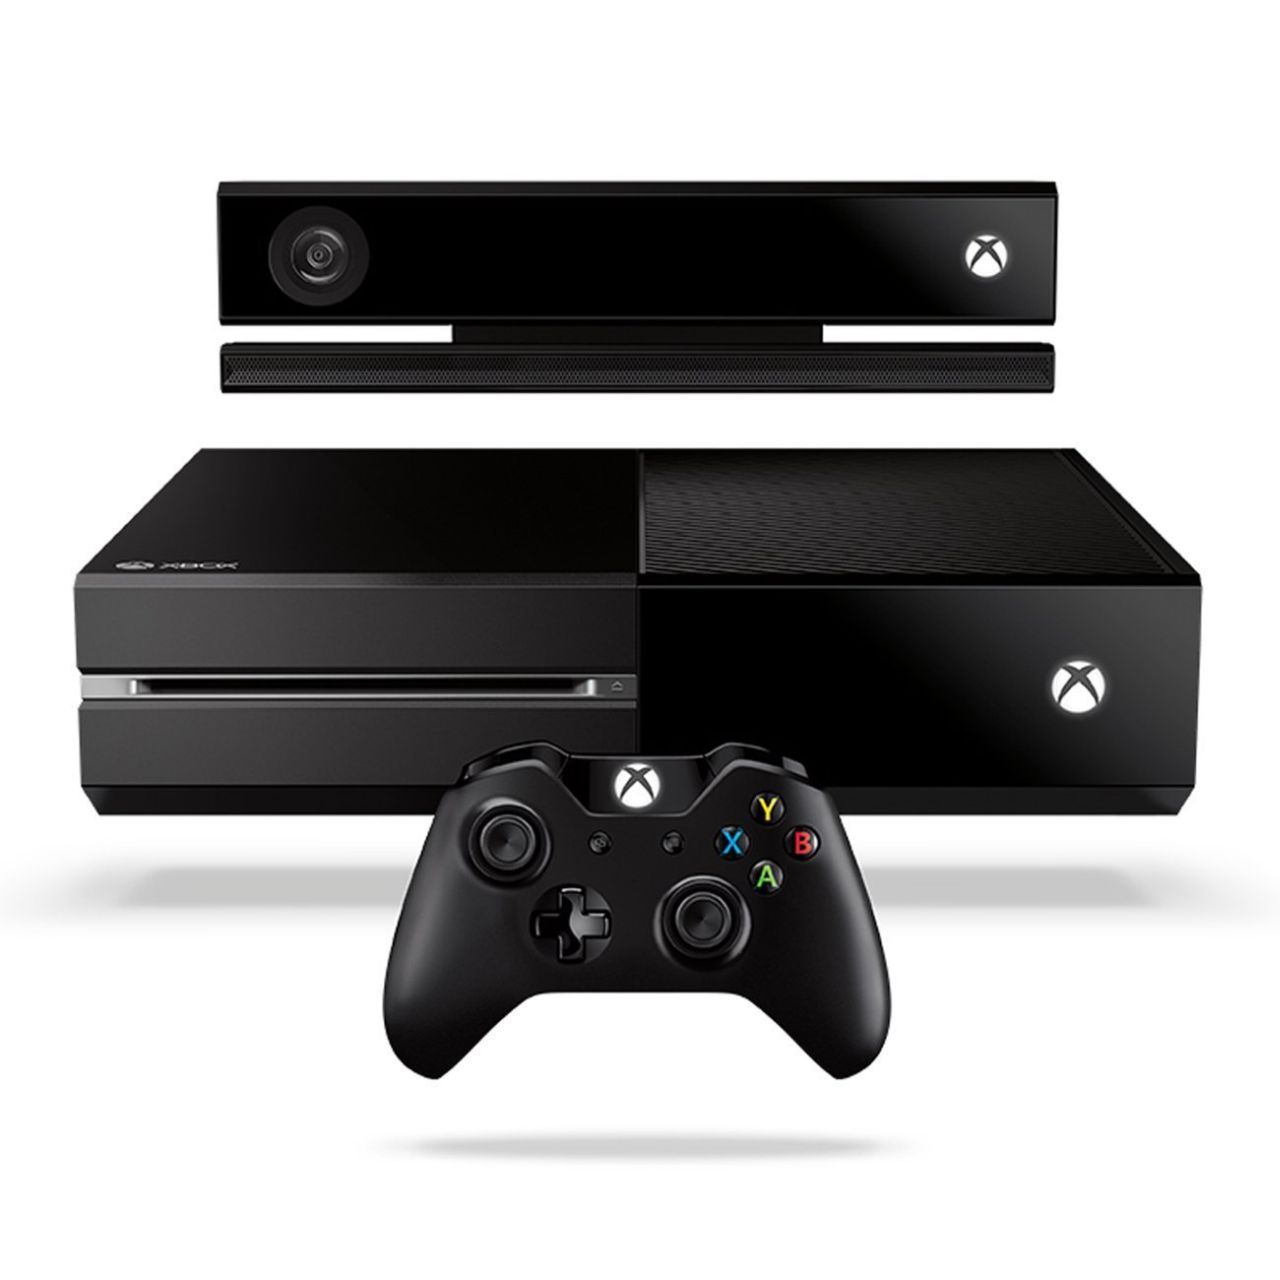 screen Sudan That Kinect-Less Xbox One Announced, Priced at 399 Dollars or Euro on June 9